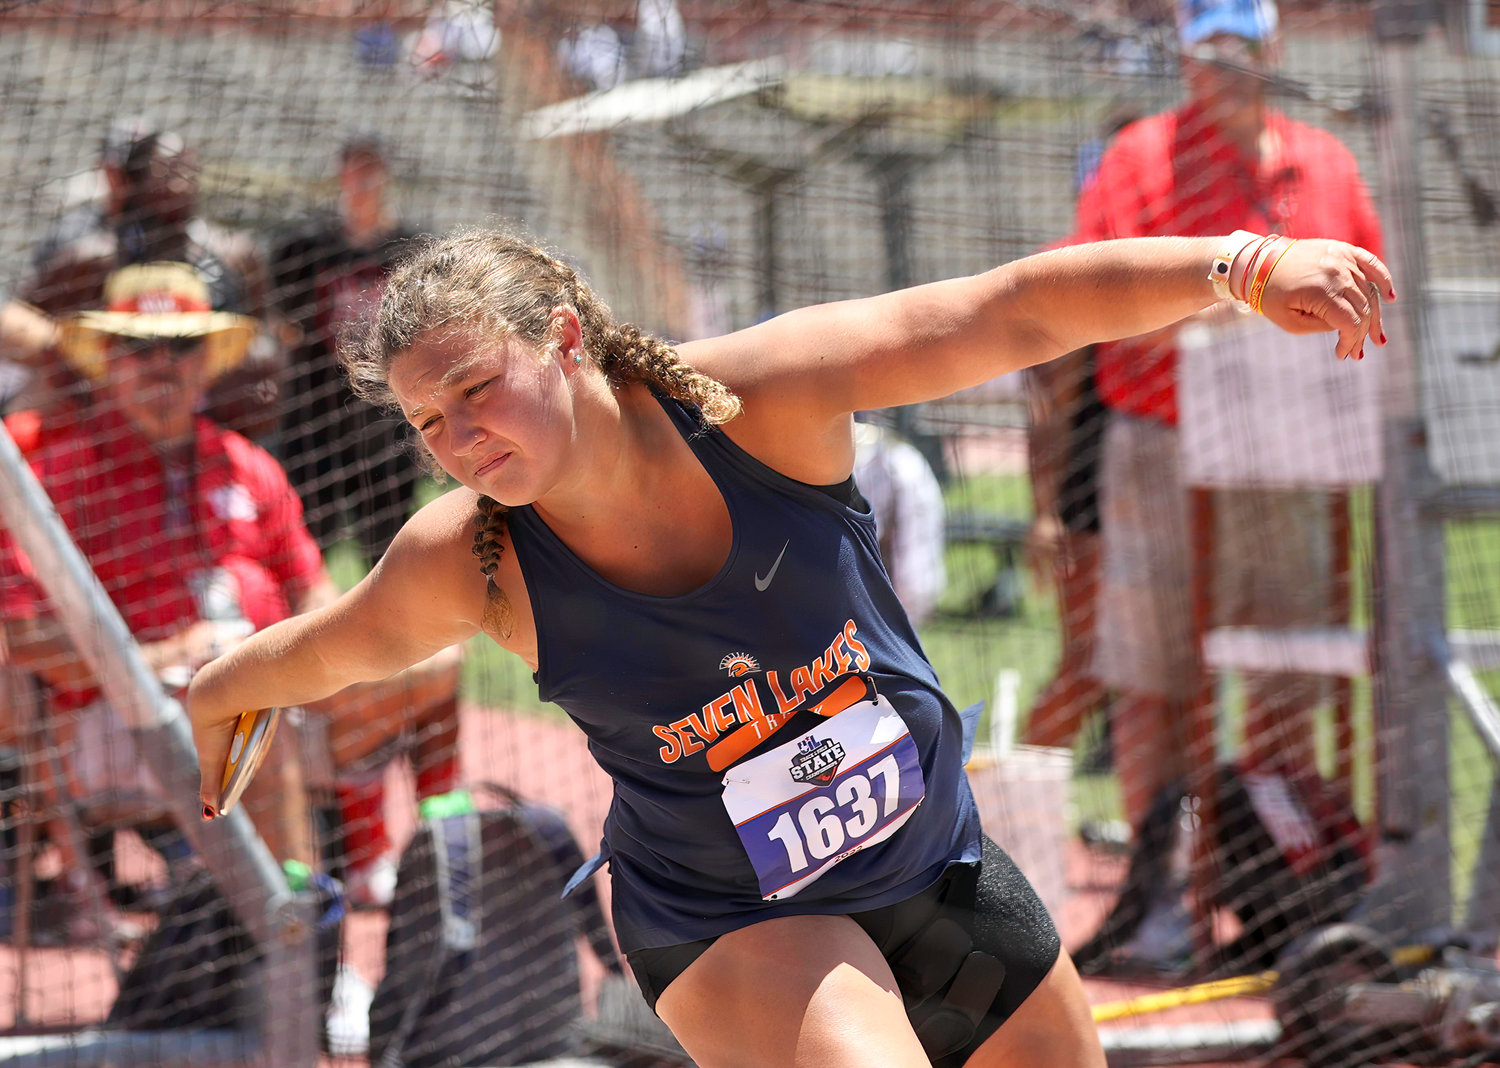 Janey Campbell of Seven Lakes High School competes in Class 6A girls discus event at the UIL State Track and Field Meet on May 14, 2022 in Austin, Texas.